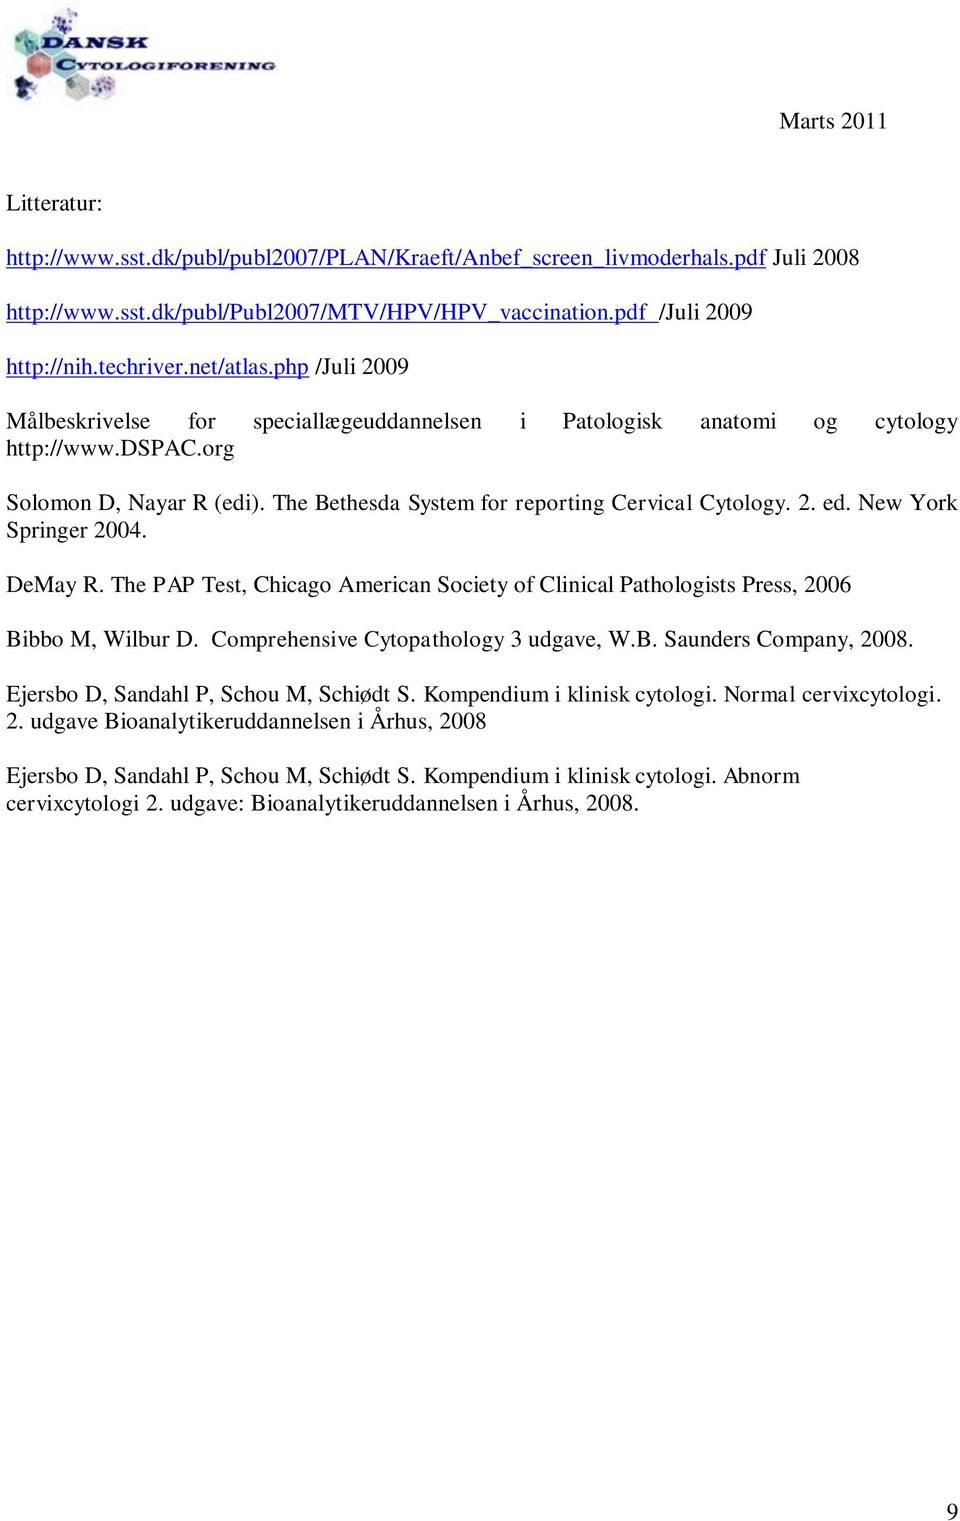 New York Springer 2004. DeMay R. The PAP Test, Chicago American Society of Clinical Pathologists Press, 2006 Bibbo M, Wilbur D. Comprehensive Cytopathology 3 udgave, W.B. Saunders Company, 2008.